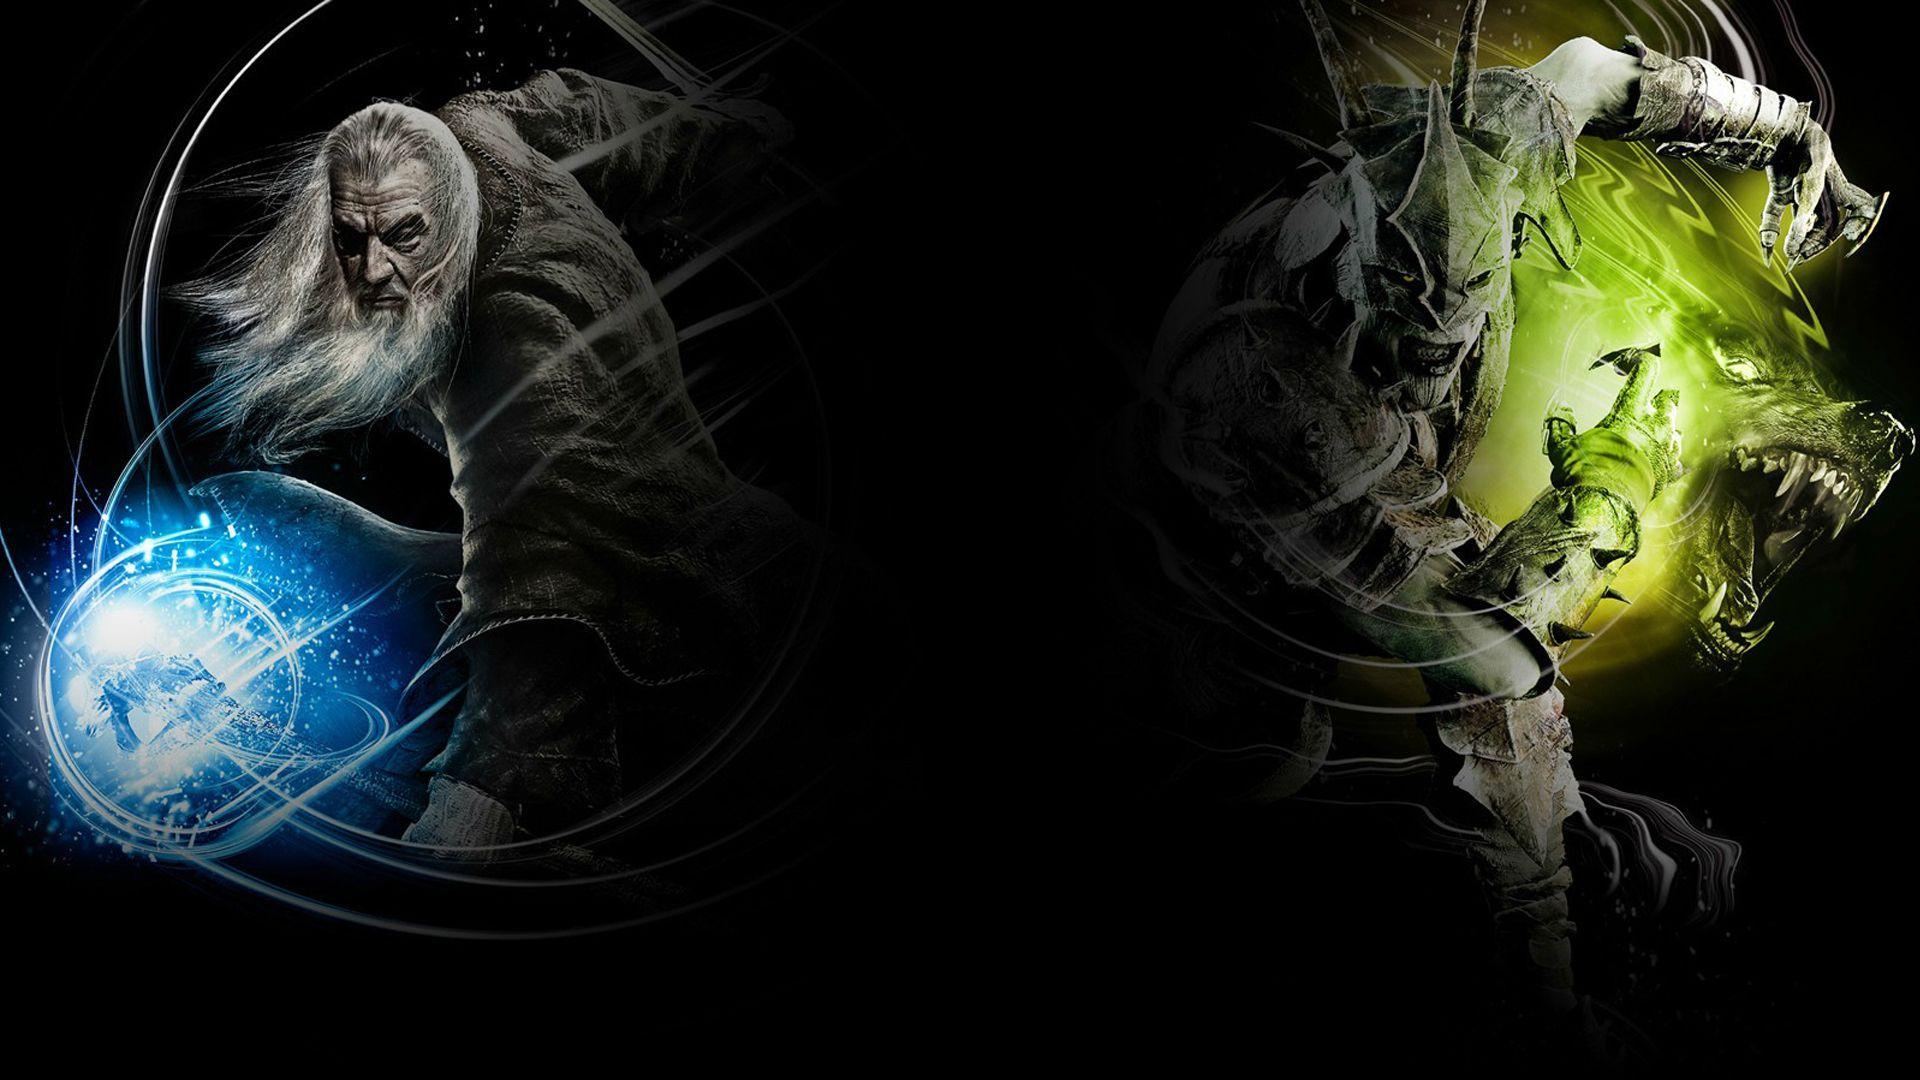 Guardians Of Middle Earth Wallpaper. Guardians Of Middle